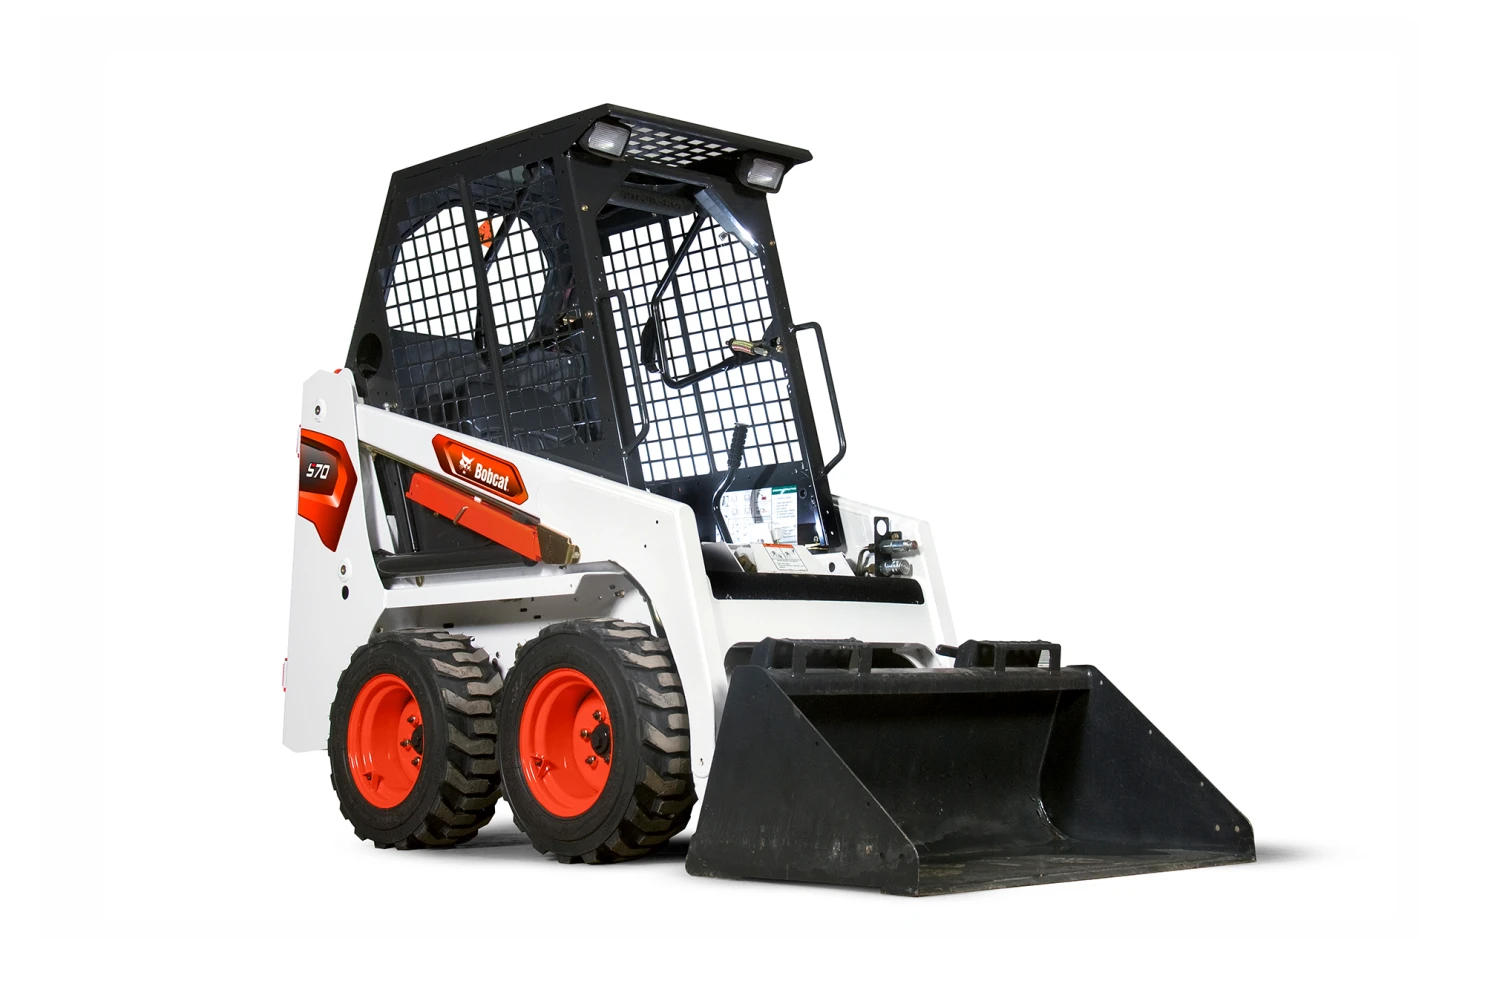 Browse Specs and more for the Bobcat S70 Skid-Steer Loader - Bobcat of Indy